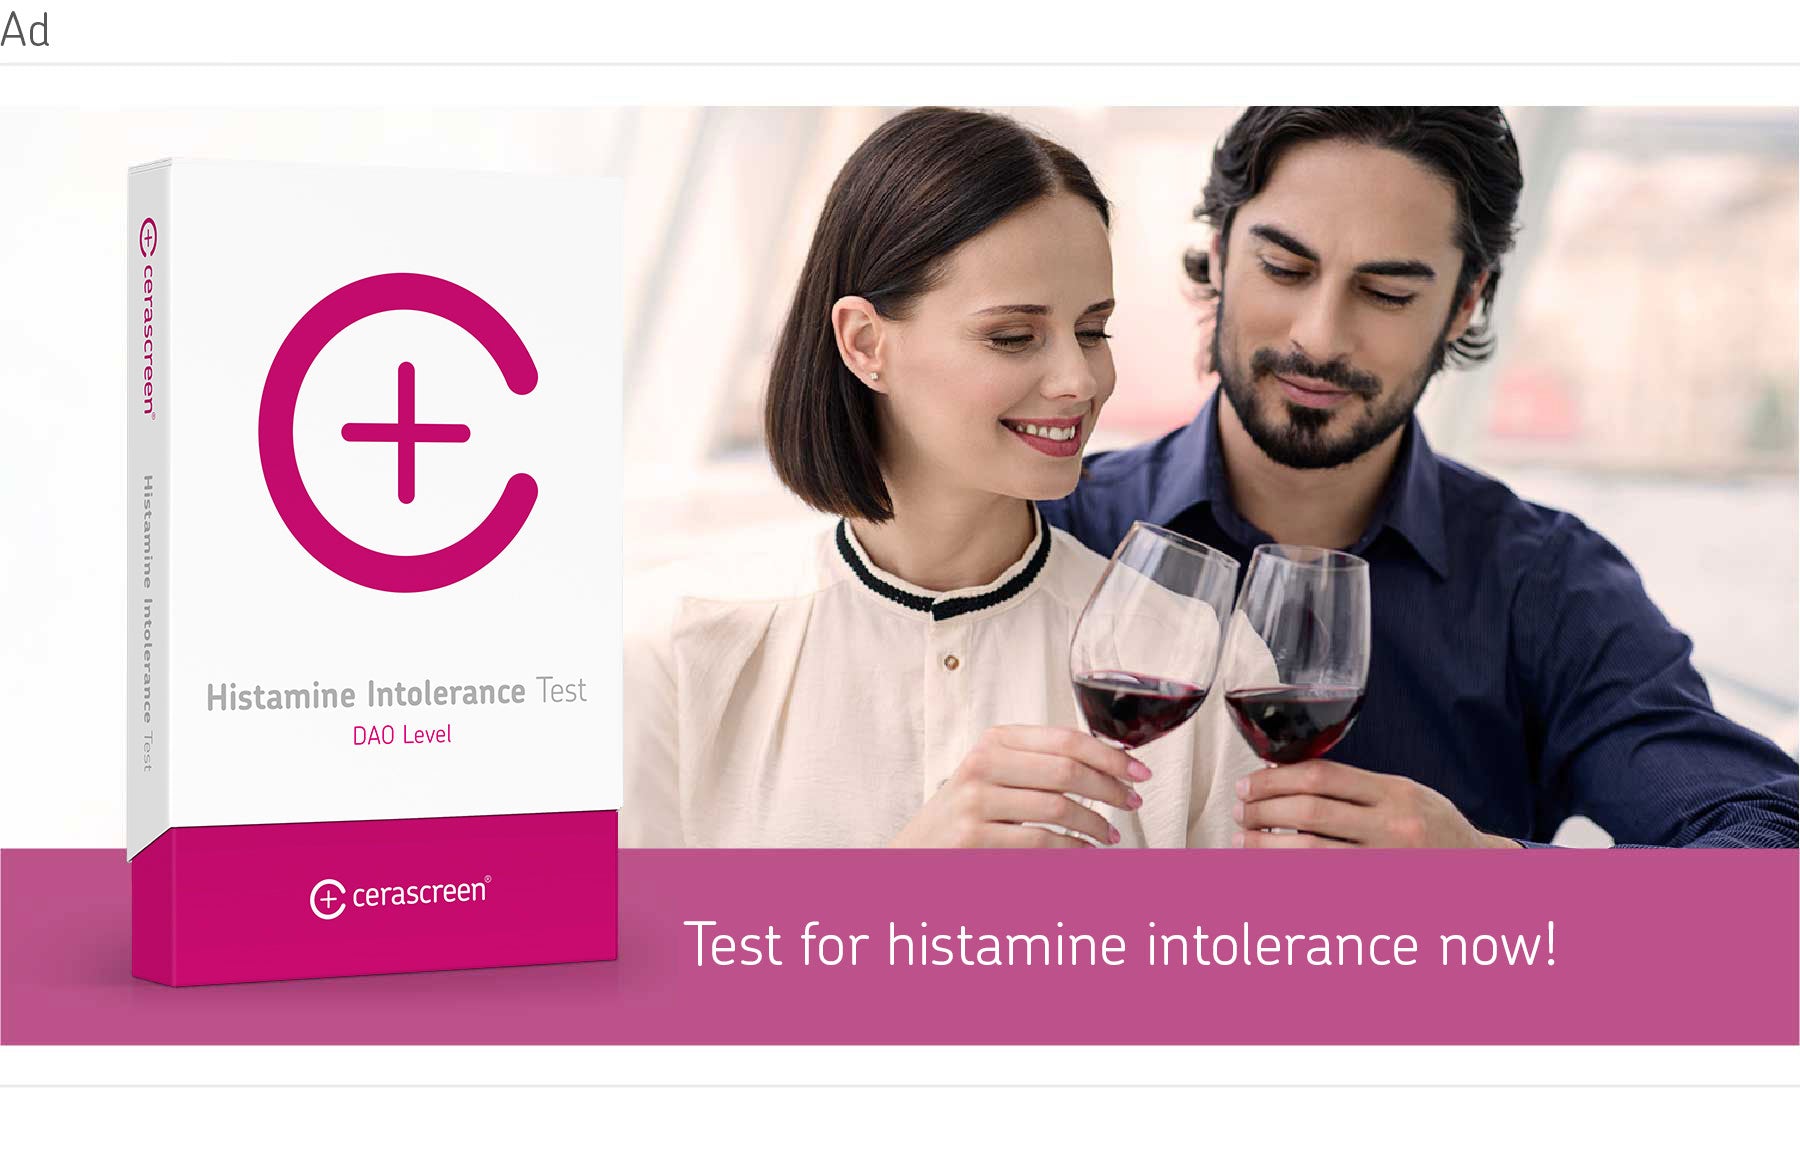 Test your histamine reaction with histamine intolerance test